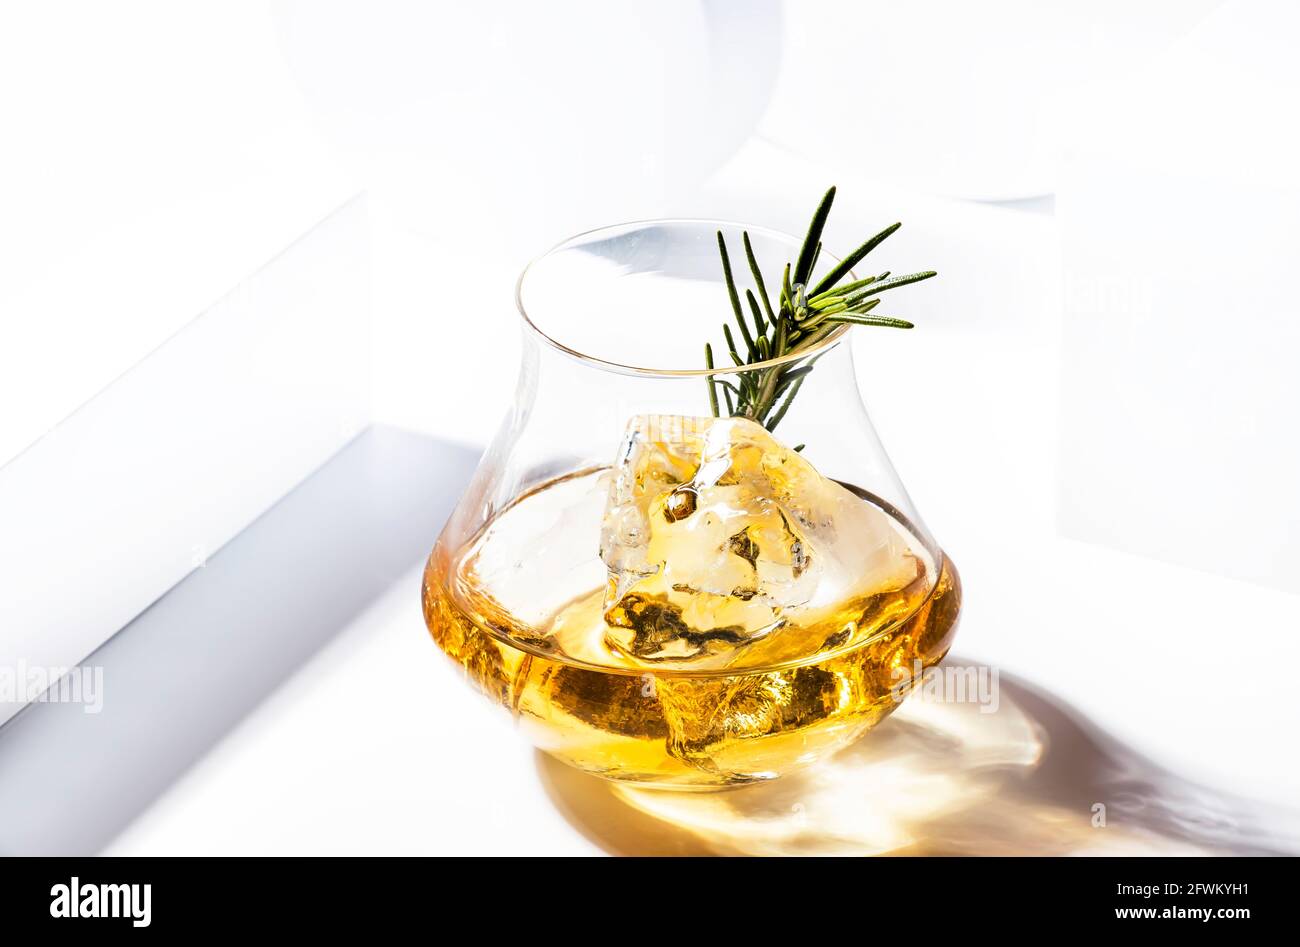 https://c8.alamy.com/comp/2FWKYH1/whiskey-scotch-or-bourbon-glass-with-rosemary-shard-ice-on-black-white-background-with-geometric-cubes-and-circles-contemporary-still-life-2FWKYH1.jpg